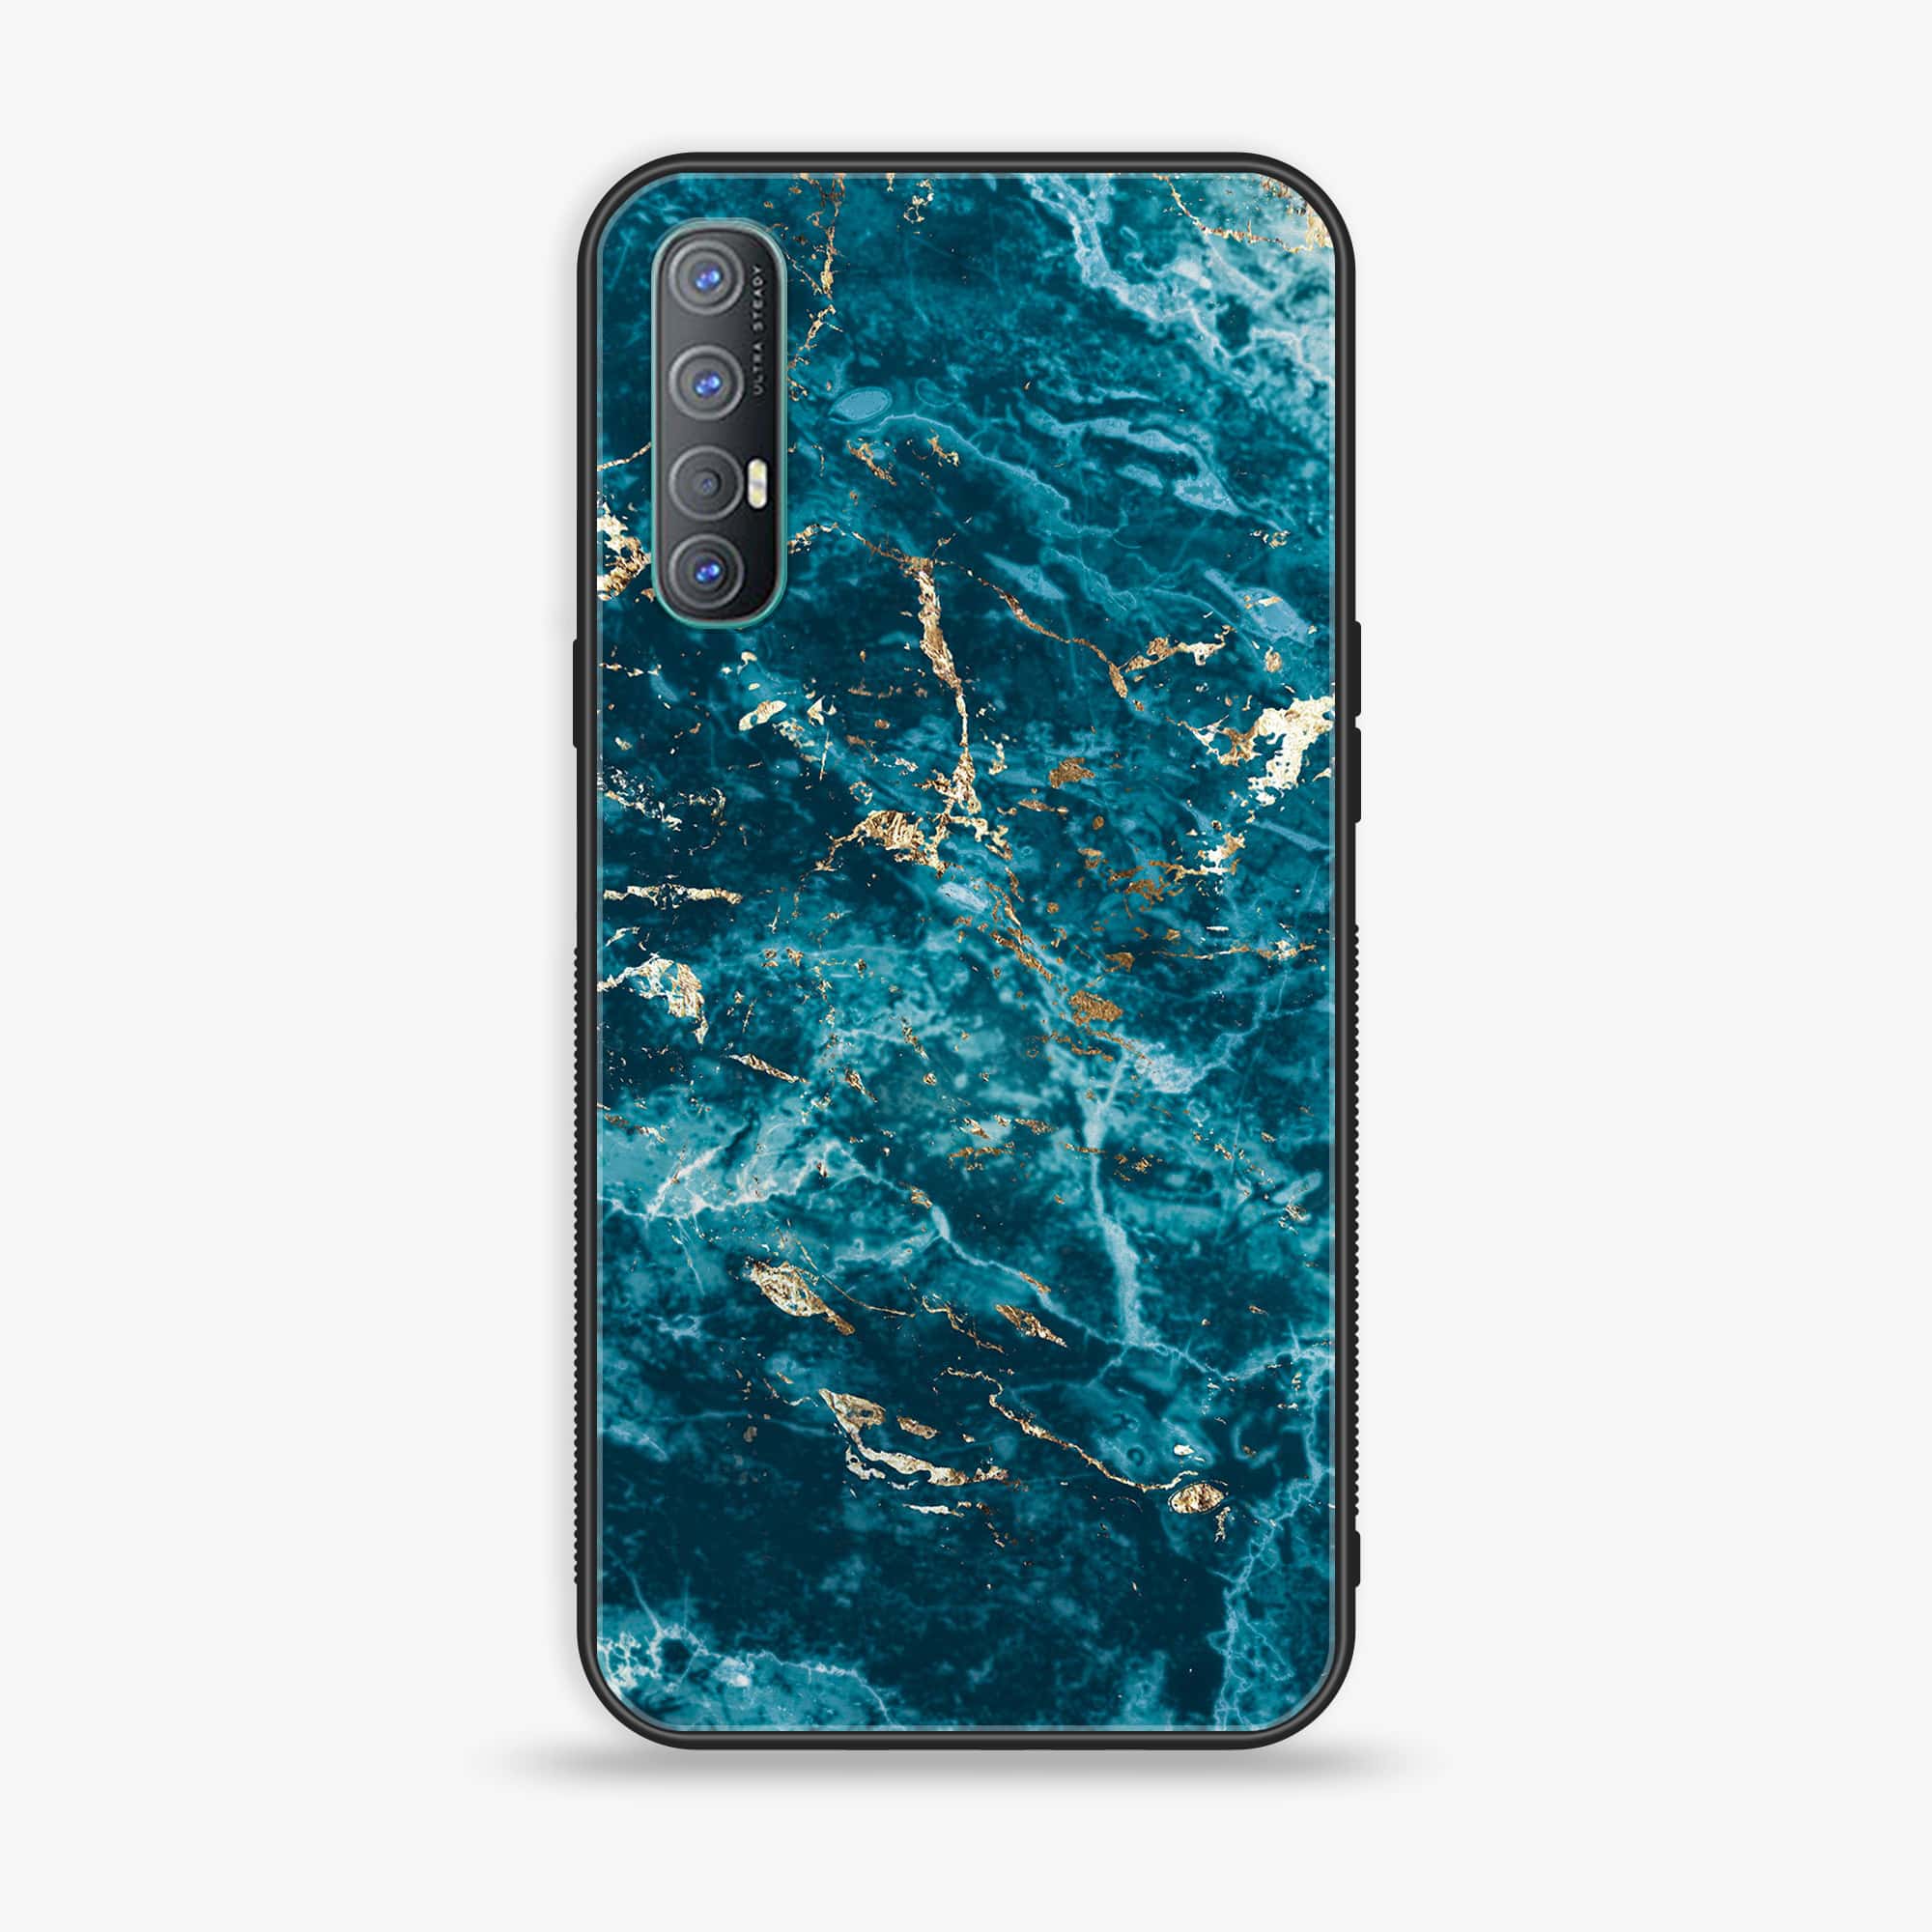 Oppo Find X2 Neo - Blue Marble V 2.0 - Premium Printed Glass soft Bumper shock Proof Case